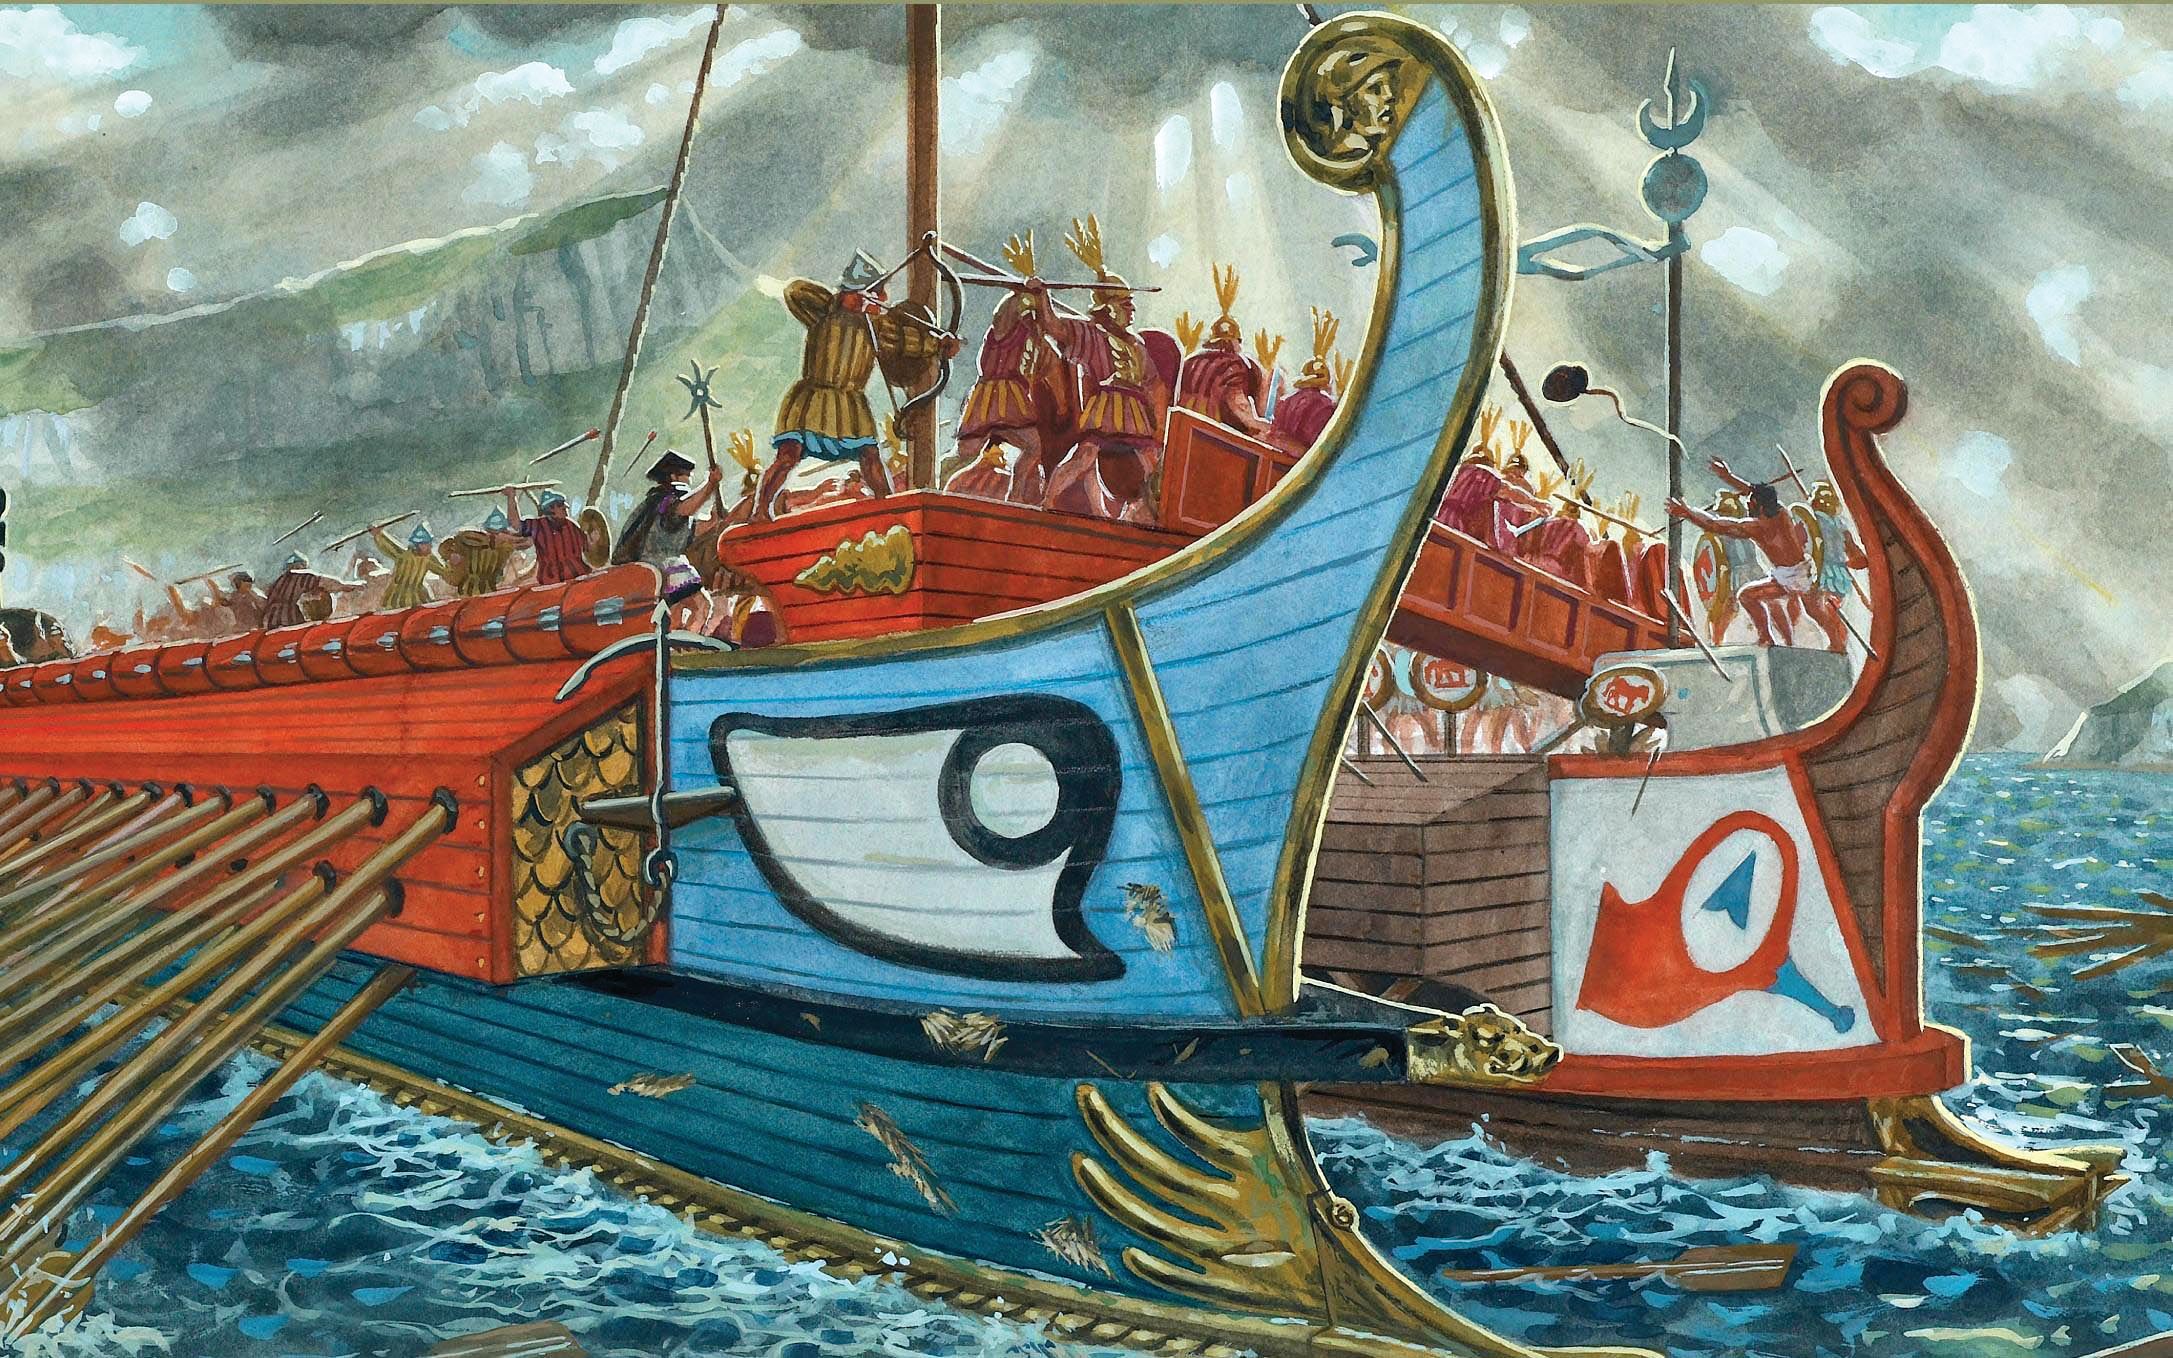 Disarmed during the Second Punic War, the Carthaginians managed to build 50 triremes during the siege—to the surprise of the Romans. This illustration depicts the crew of a Roman trireme boarding a Carthaginian ship. Powered mainly by oars, both vessels have a rostrum, usually a single piece of fused bronze, extending from the bow at the waterline to ram and sink enemy ships.